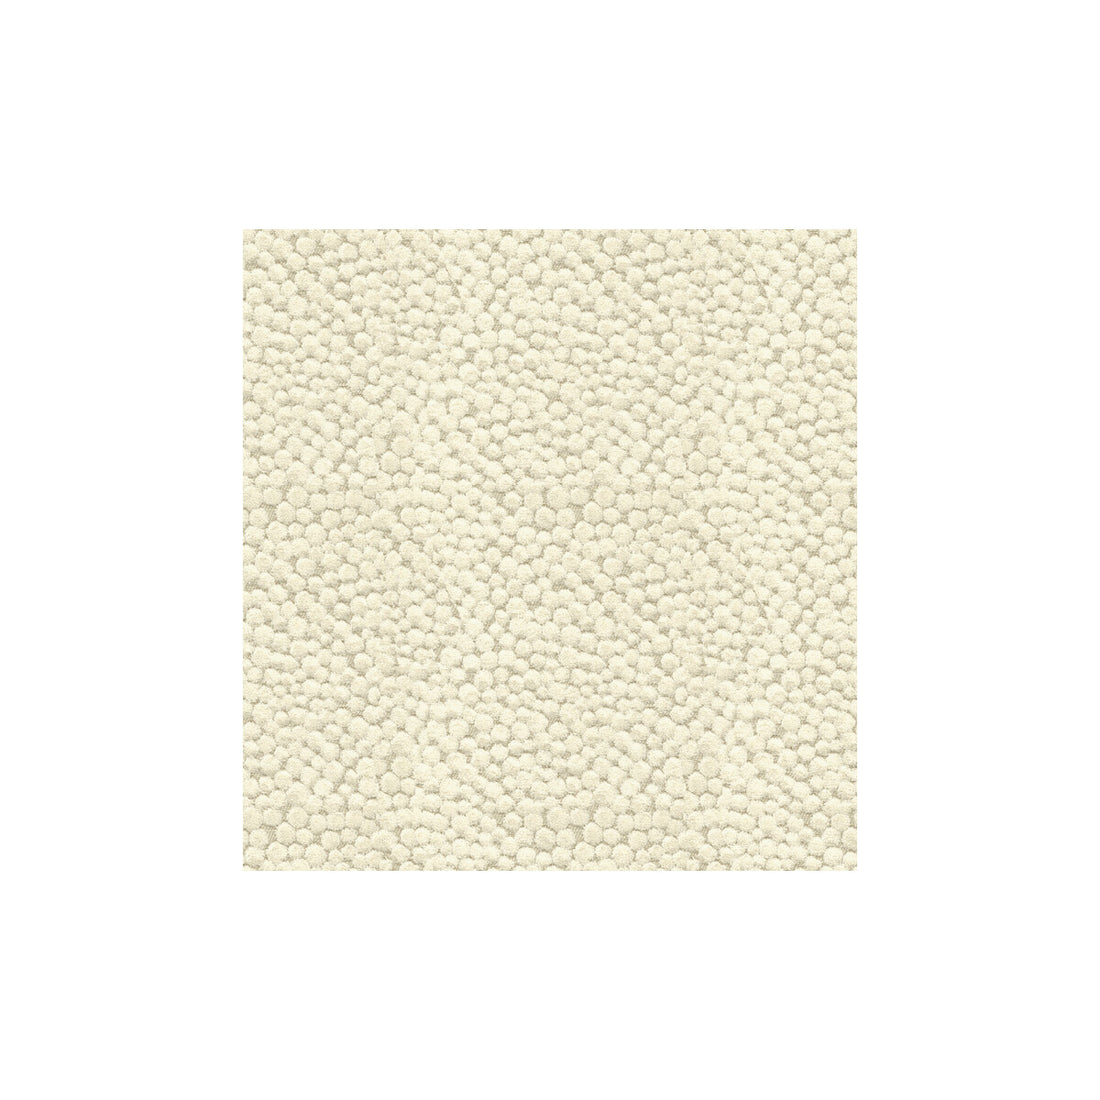 Polka Dot Plush fabric in natural color - pattern 32972.1116.0 - by Kravet Couture in the Modern Colors III collection